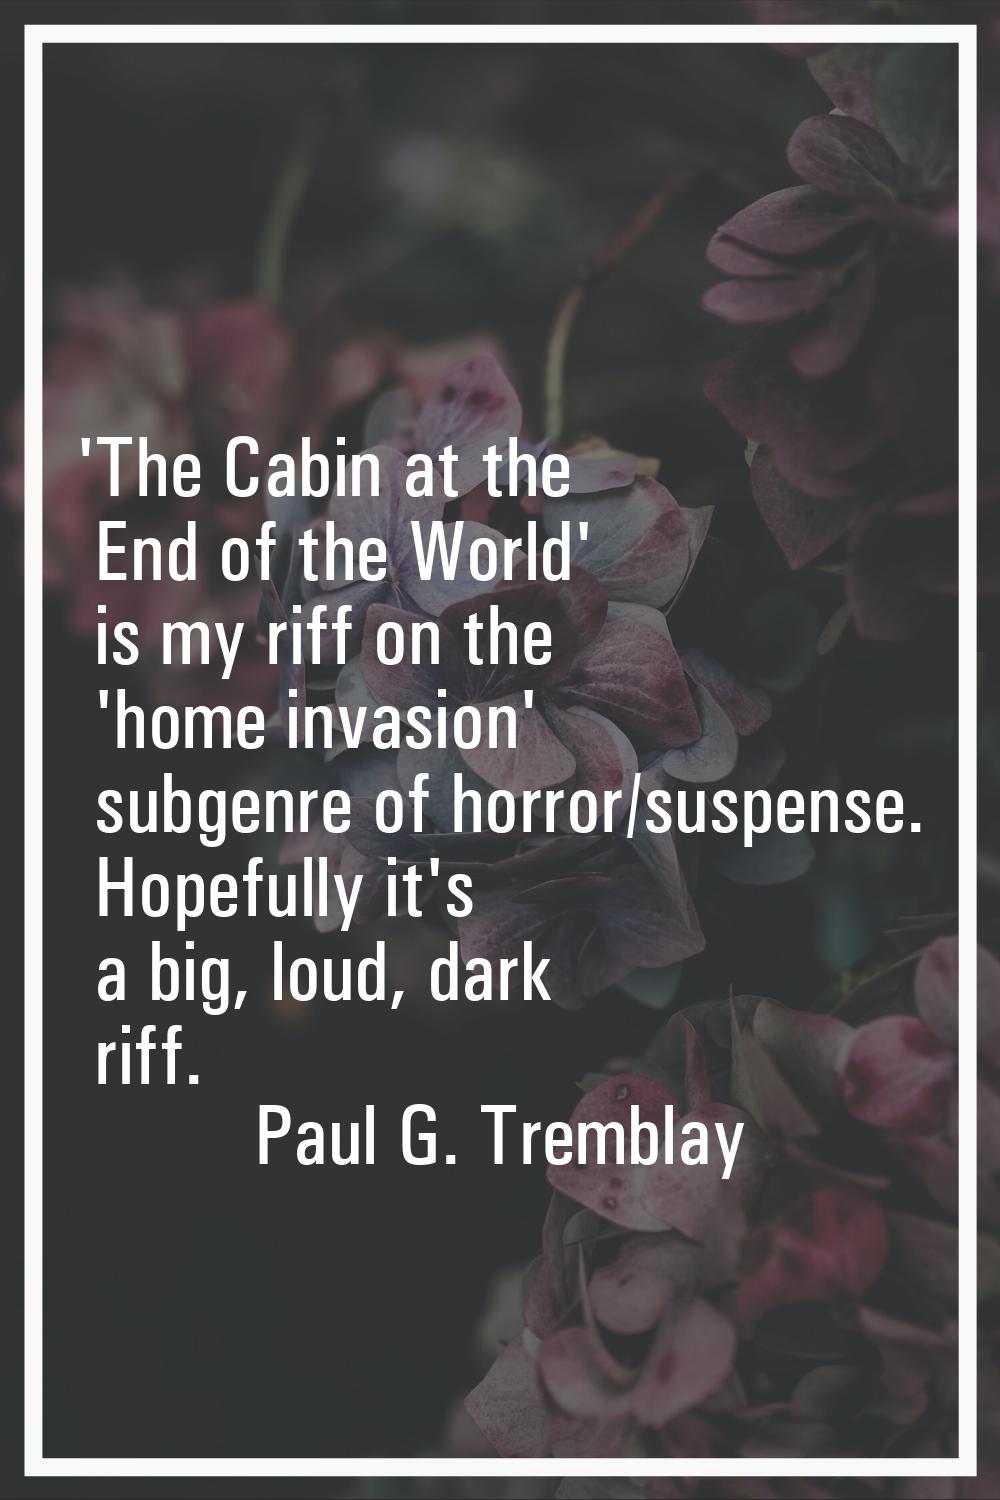 'The Cabin at the End of the World' is my riff on the 'home invasion' subgenre of horror/suspense. 